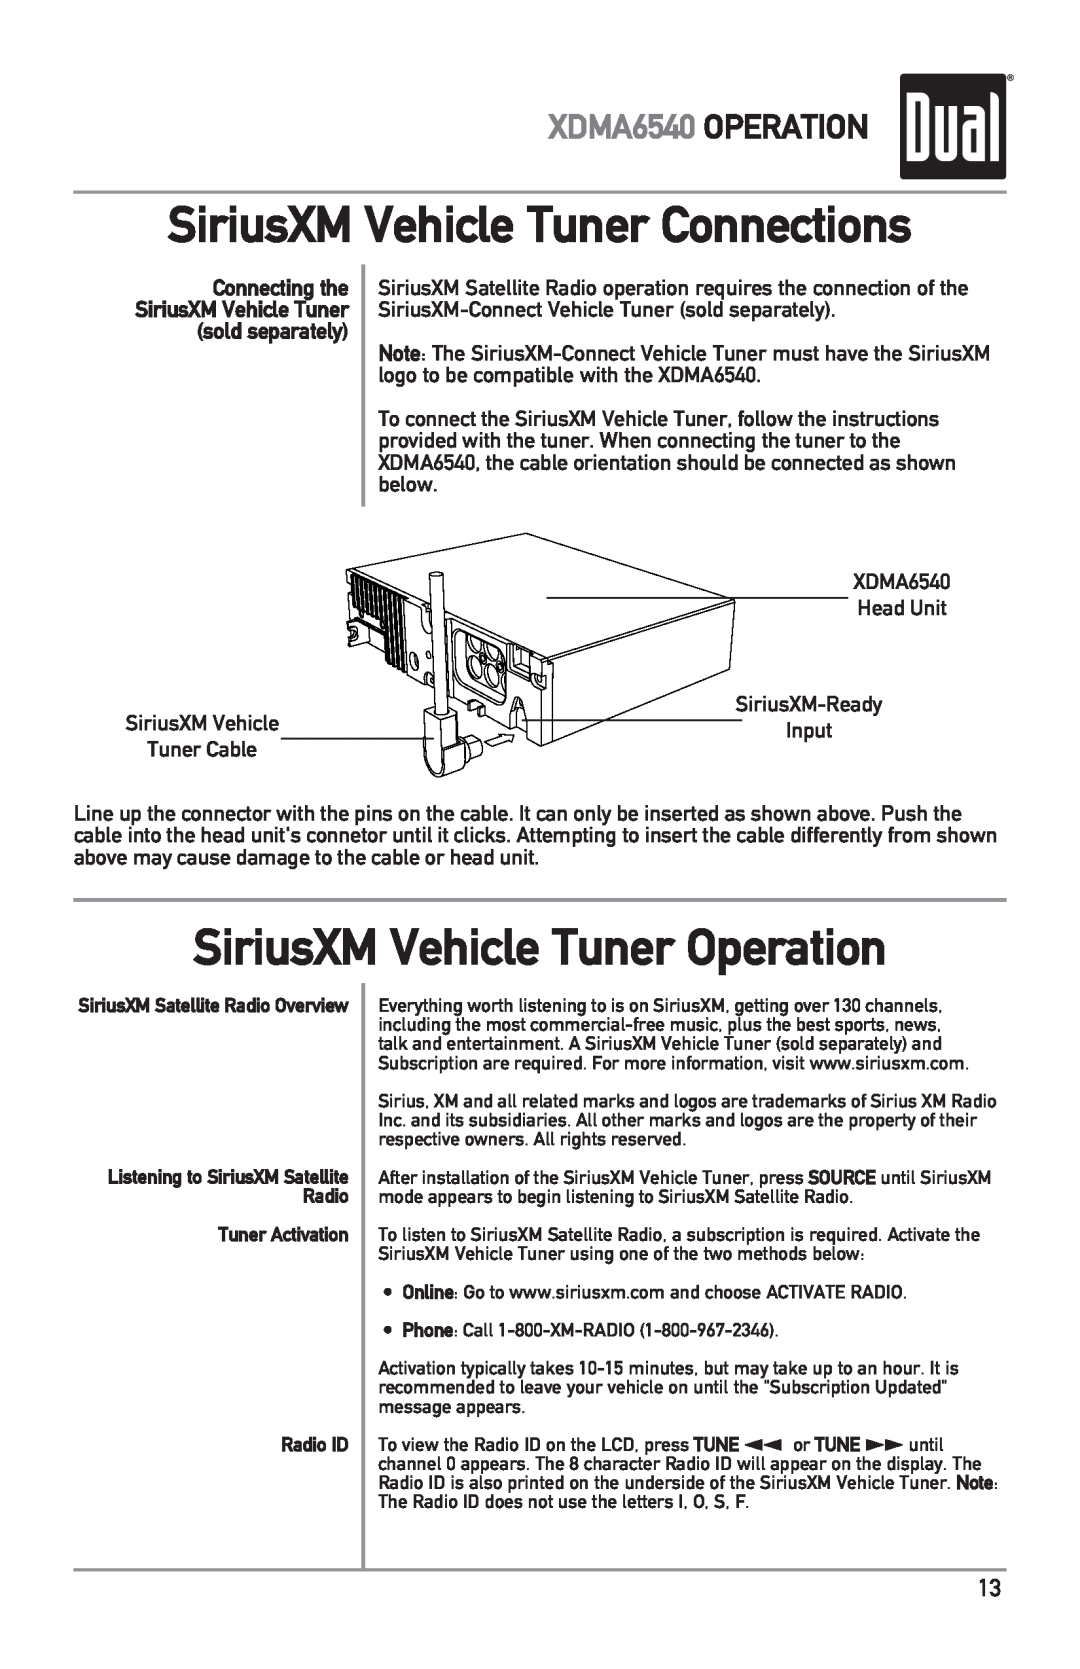 Dual SiriusXM Vehicle Tuner Connections, SiriusXM Vehicle Tuner Operation, XDMA6540 OPERATION, Connecting the 